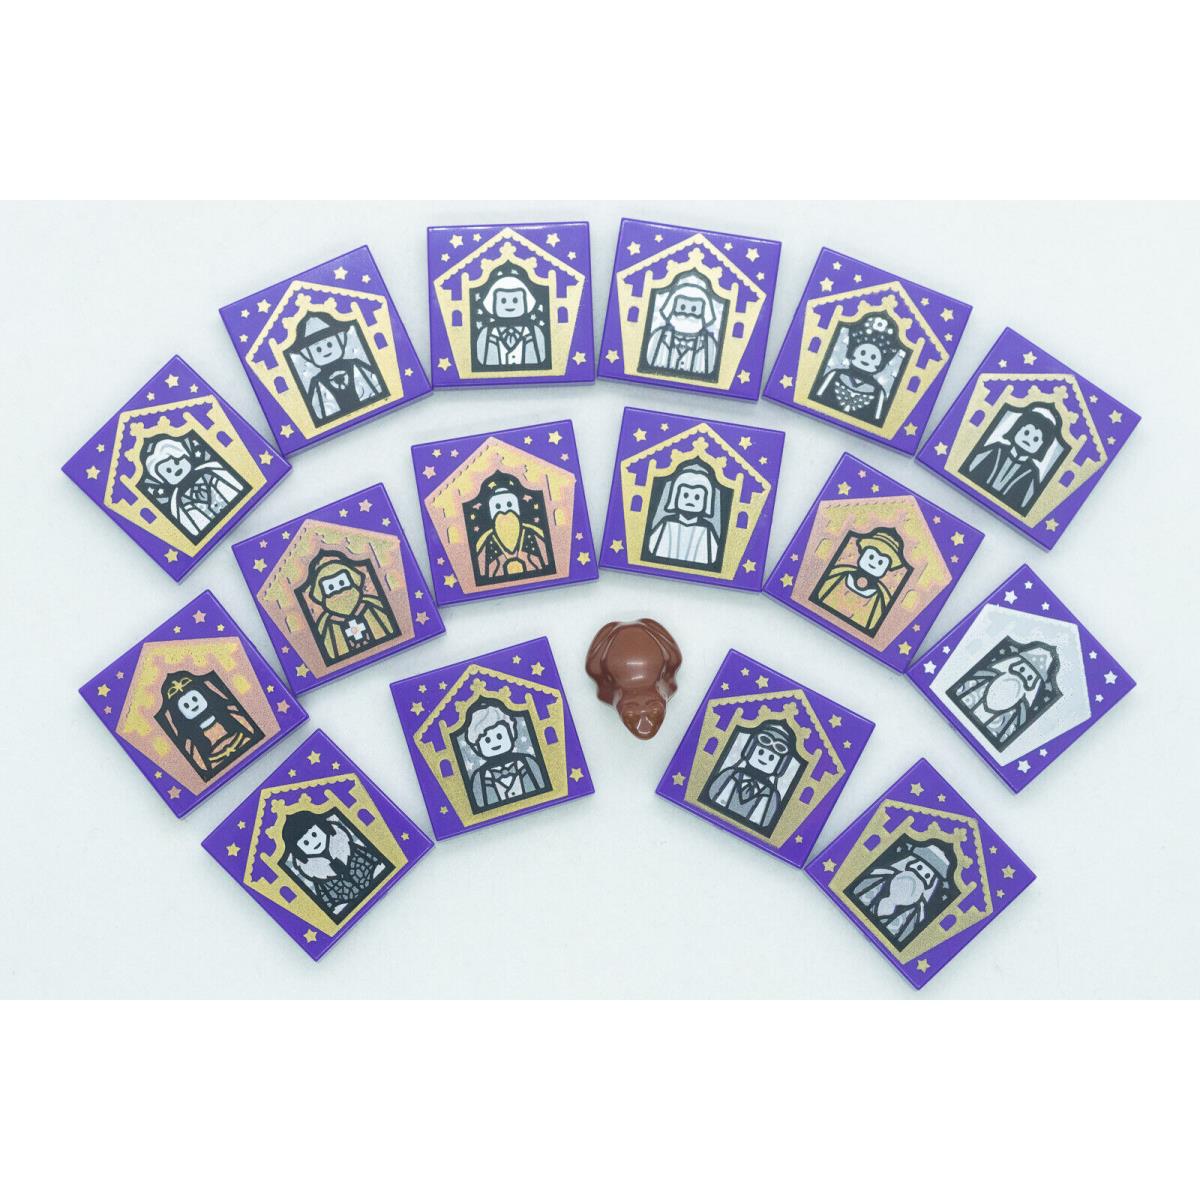 Lego Harry Potter Chocolate Frog Wizard Card Tiles Complete Set of 16